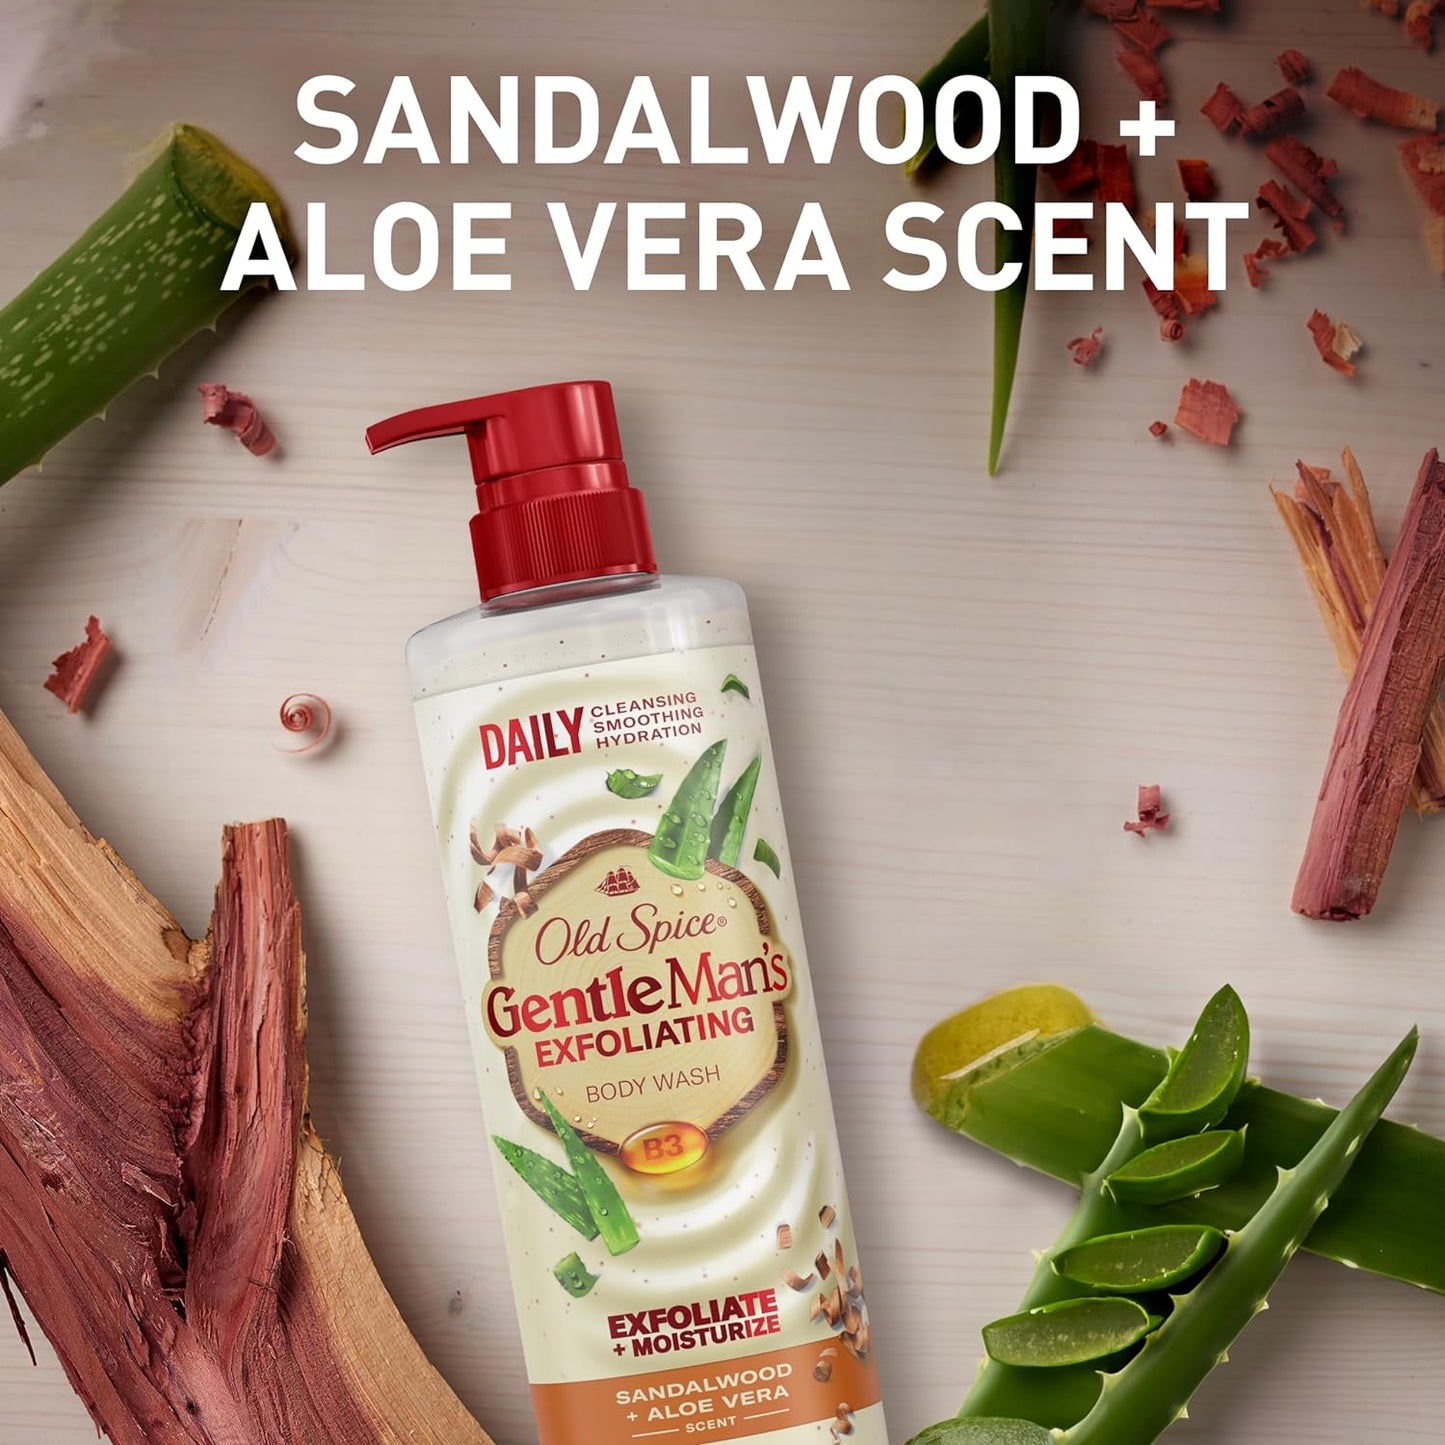 Old Spice GentleMan's Collection Exfoliating Body Wash, Sandalwood & Aloe Vera Scent, 18.0 fl oz (Pack of 4)